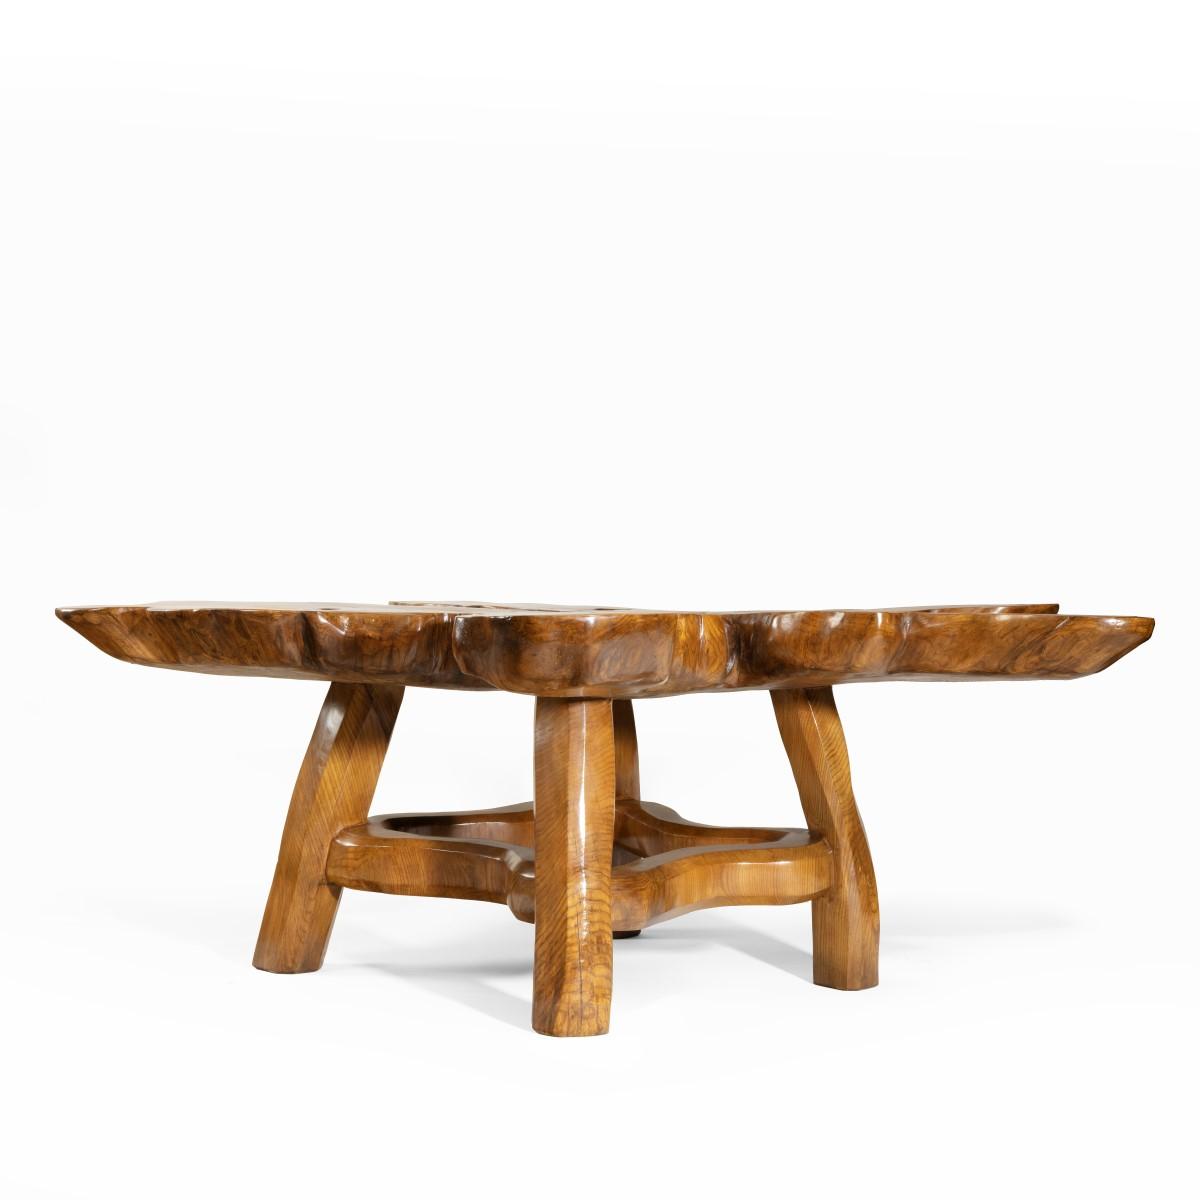 An Unusual and Attractive Centre Table by Maxie Lane